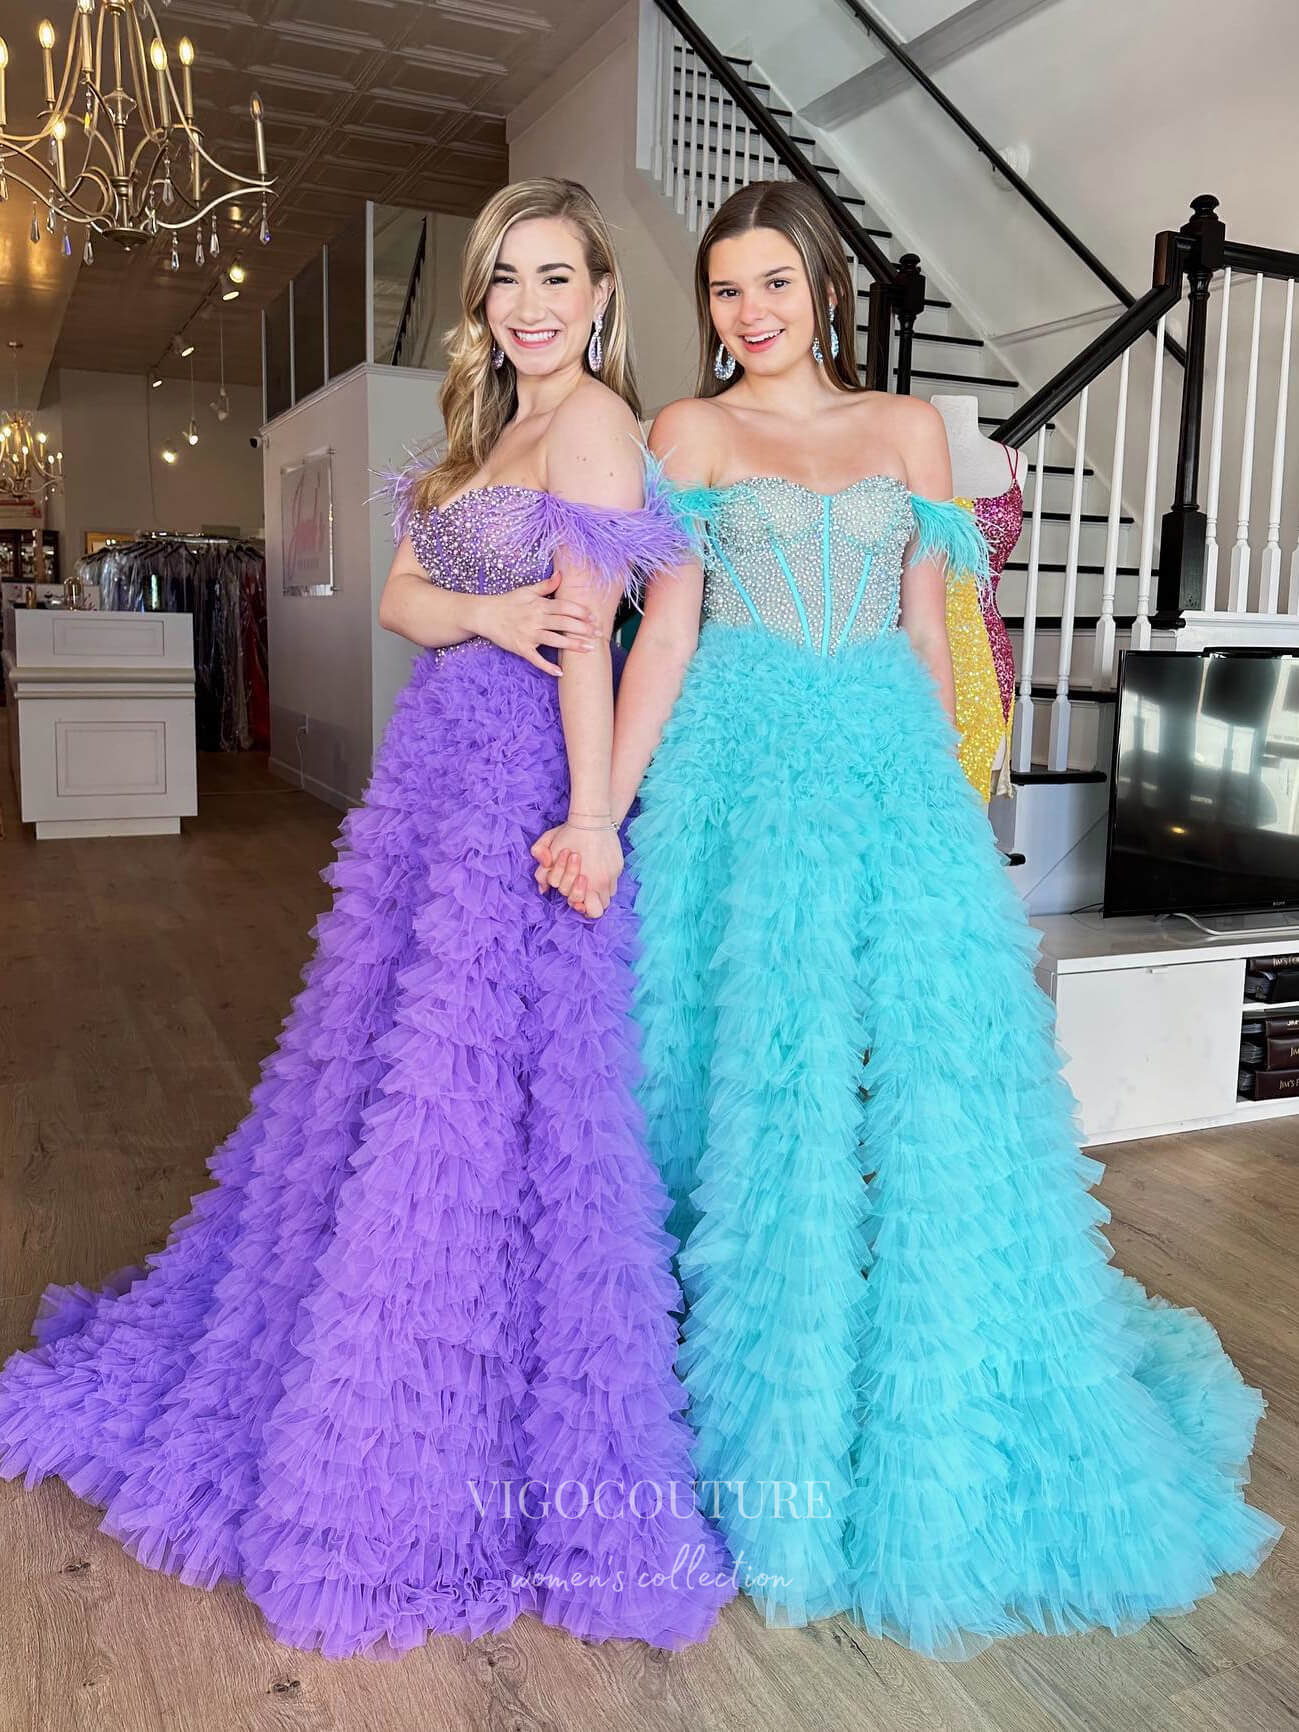 Beaded Ruffled Tulle Prom Dresses with Slit Off the Shoulder Formal Gown 22178-Prom Dresses-vigocouture-Purple-US2-vigocouture